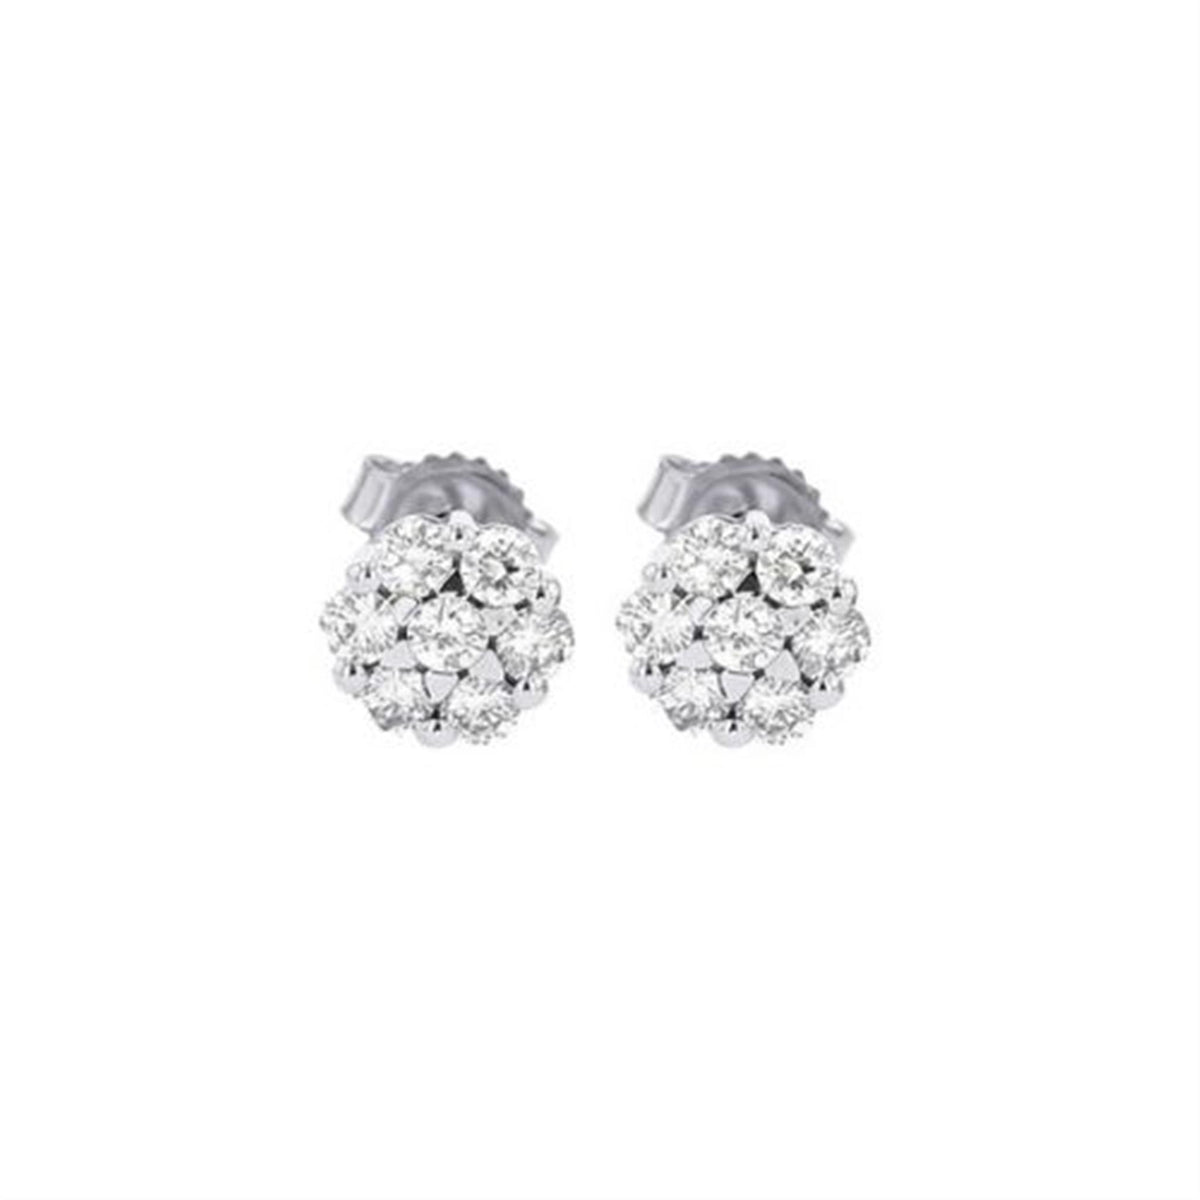 14Kt White Gold Cluster Stud Earrings With .10cttw Natural Diamonds